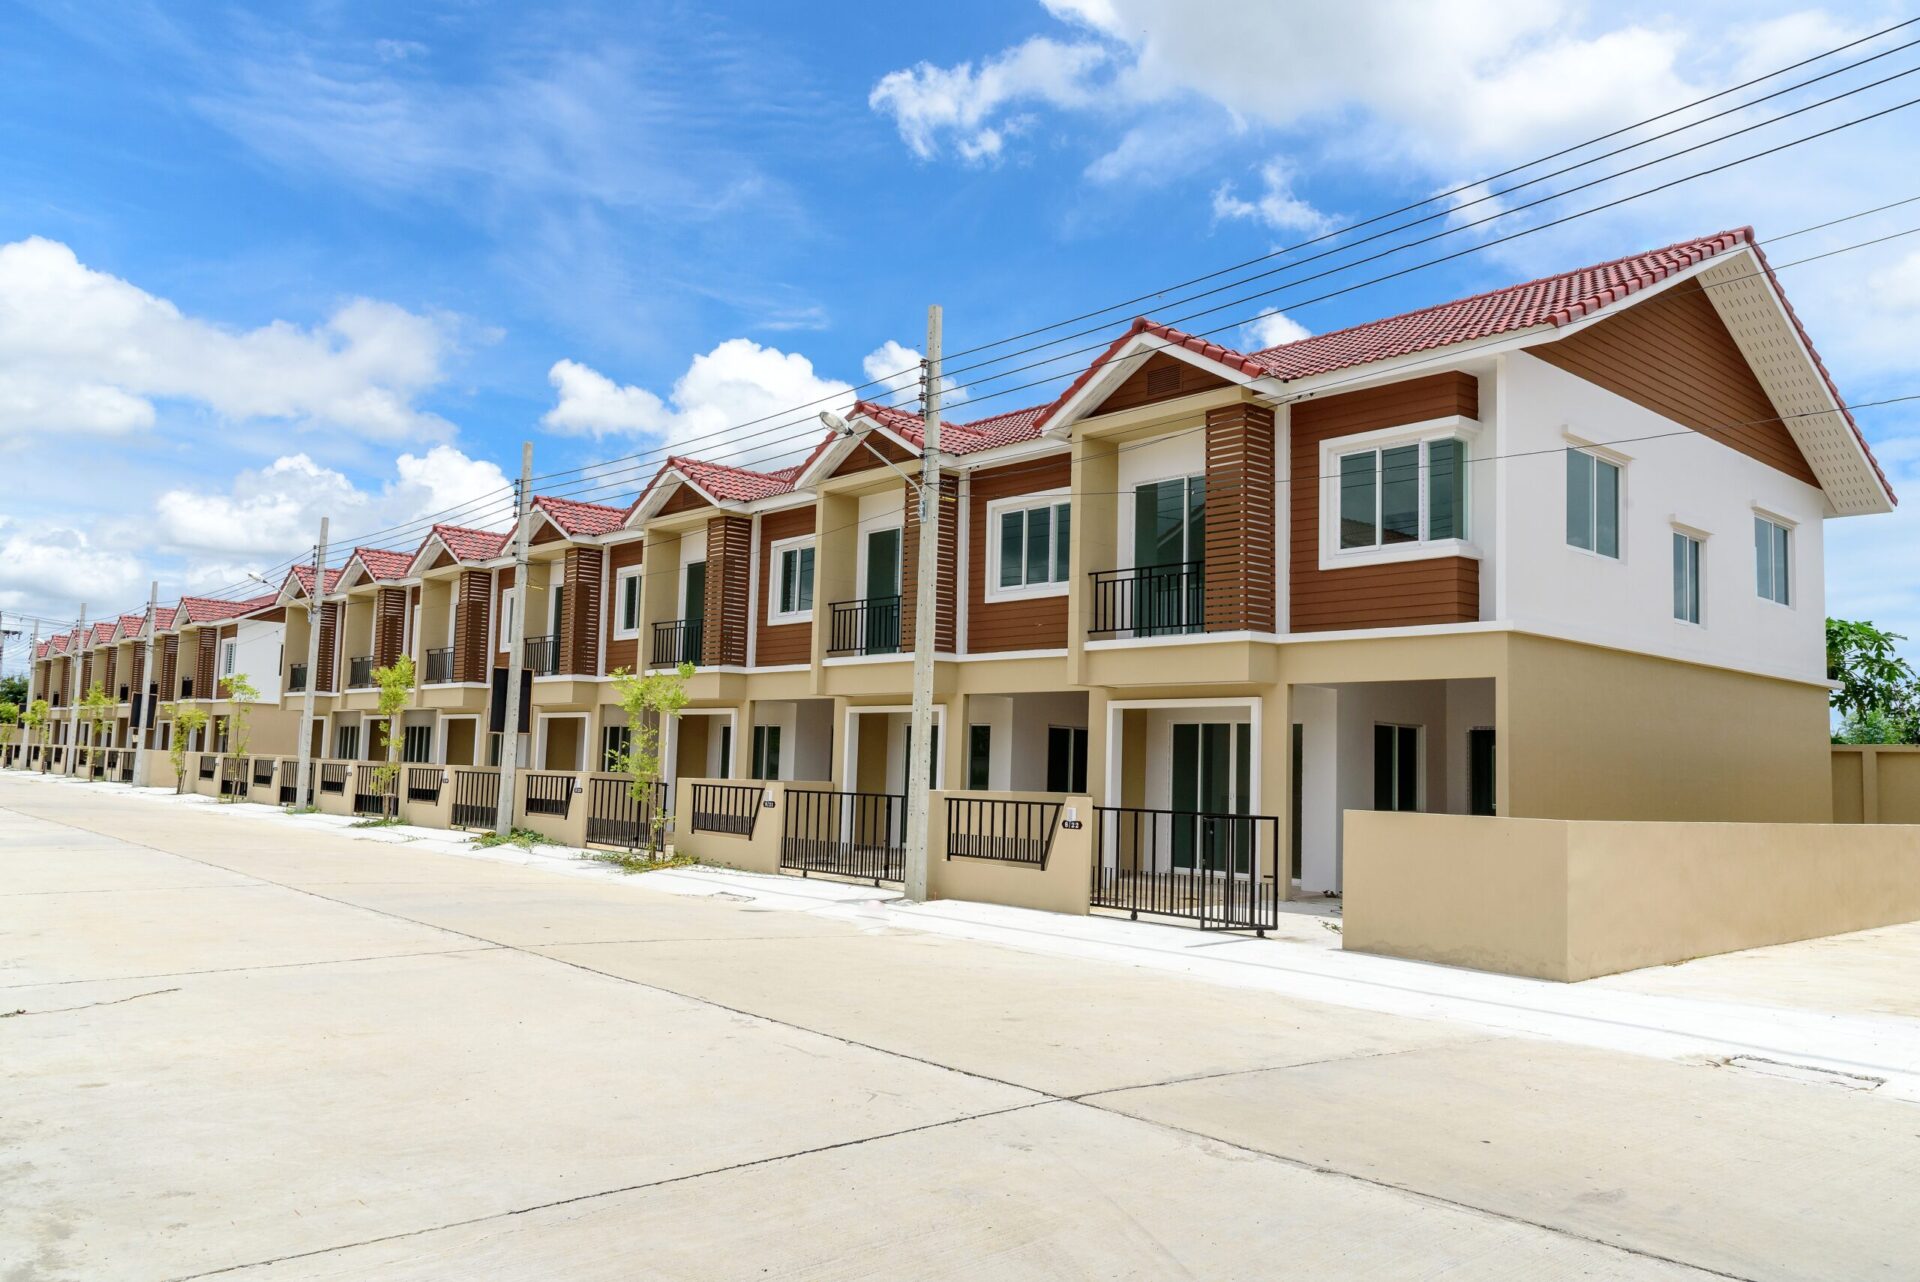 Row of just finished new brown townhouses